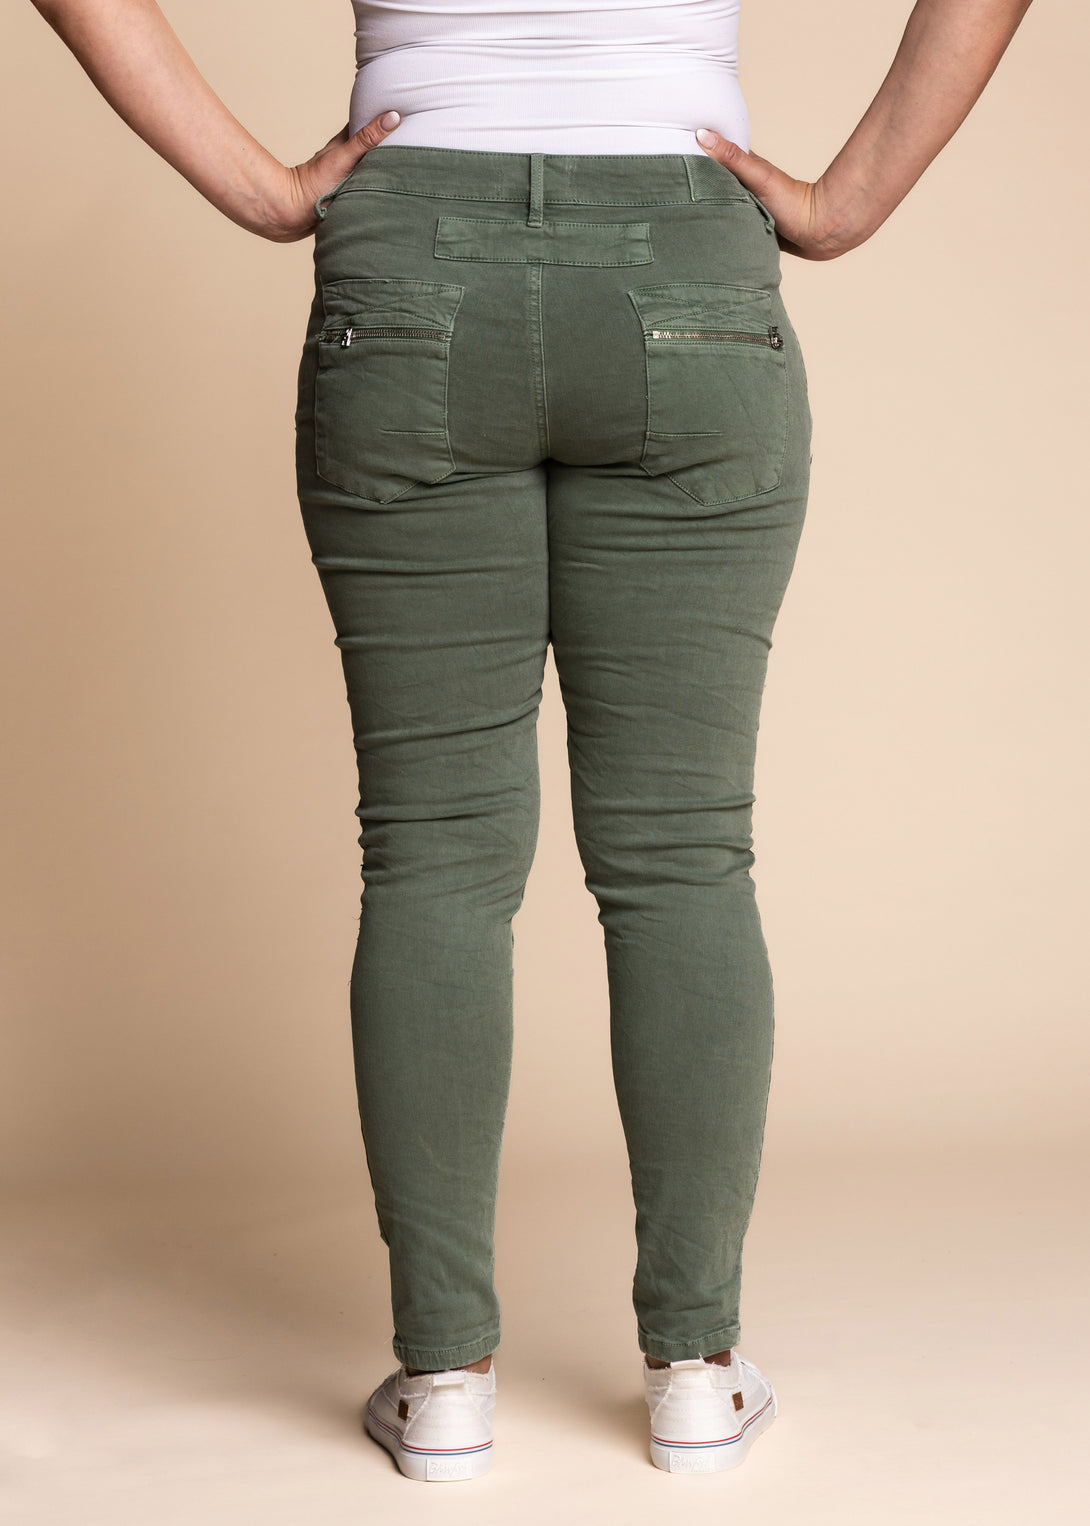 Nessie Pants in Olive - Imagine Fashion